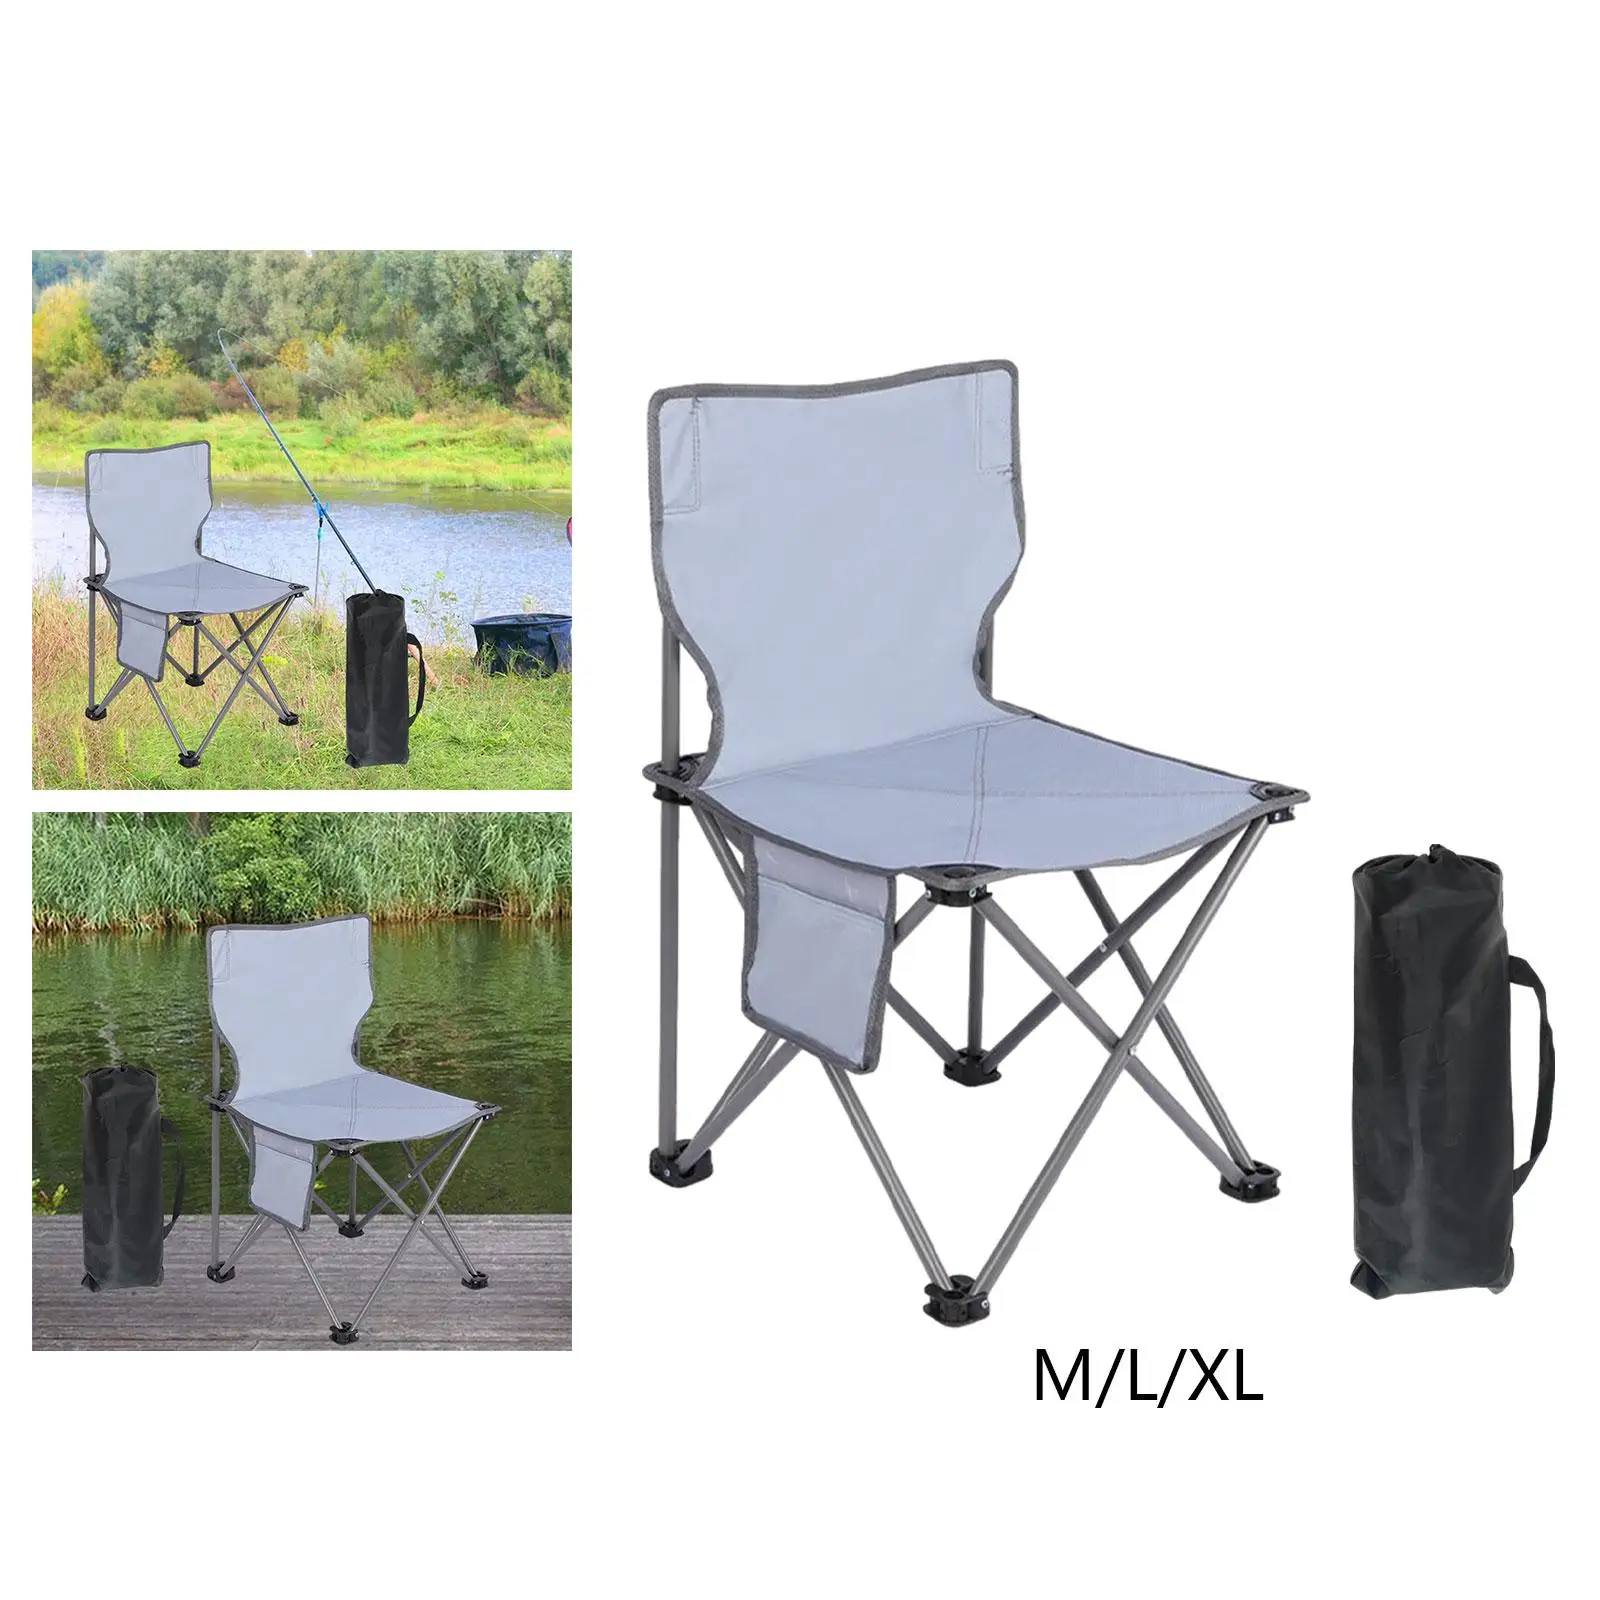 Portable Camping Chair Collapsible Chair High Back Fishing Chair Folding Chair for Outside for Park Hiking Garden Backpacking